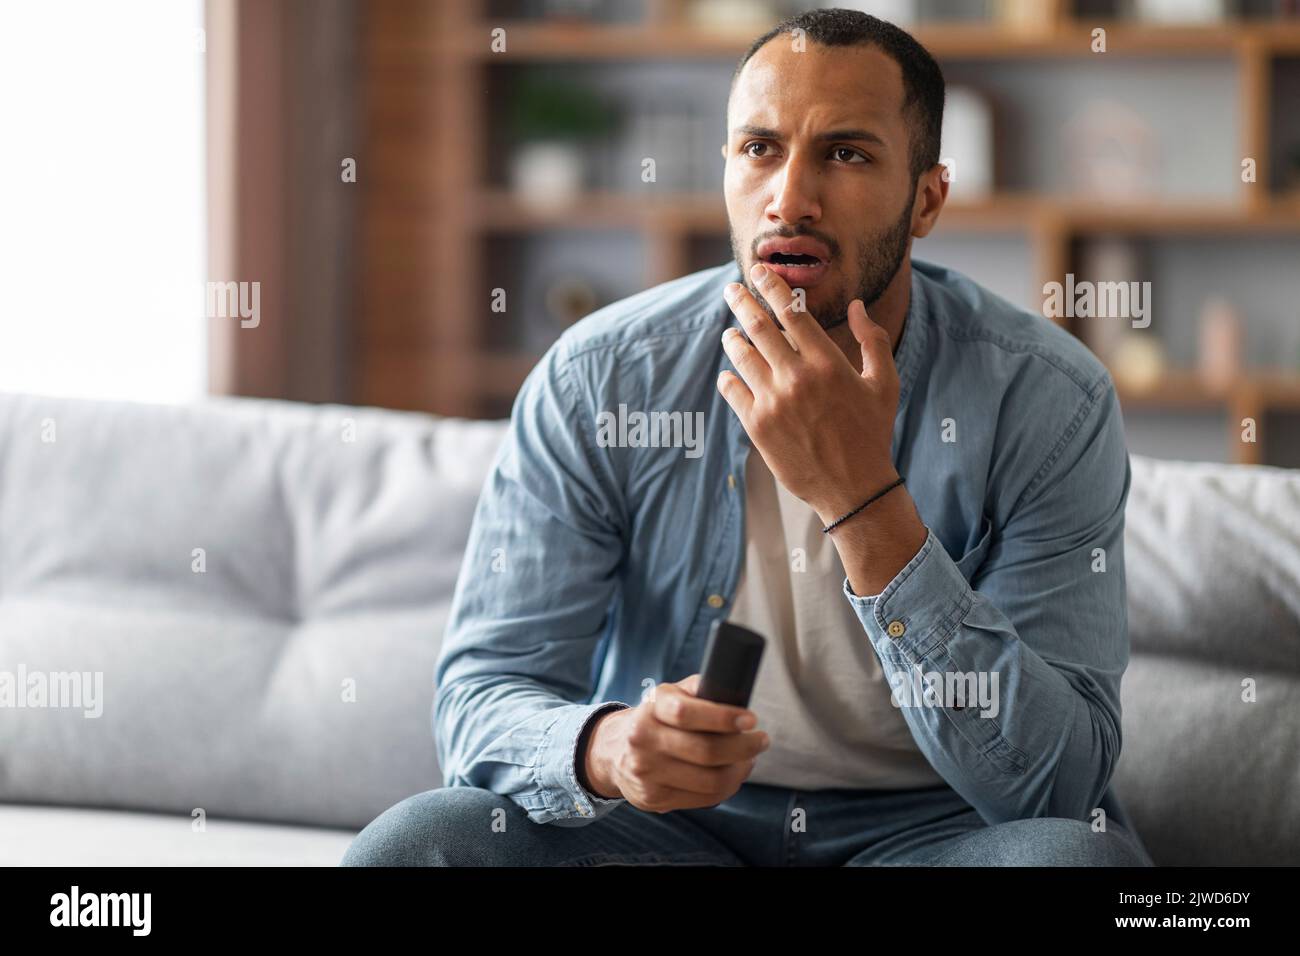 Shocked Black Man With Remote Controller In Hand Sitting On Couch Stock Photo